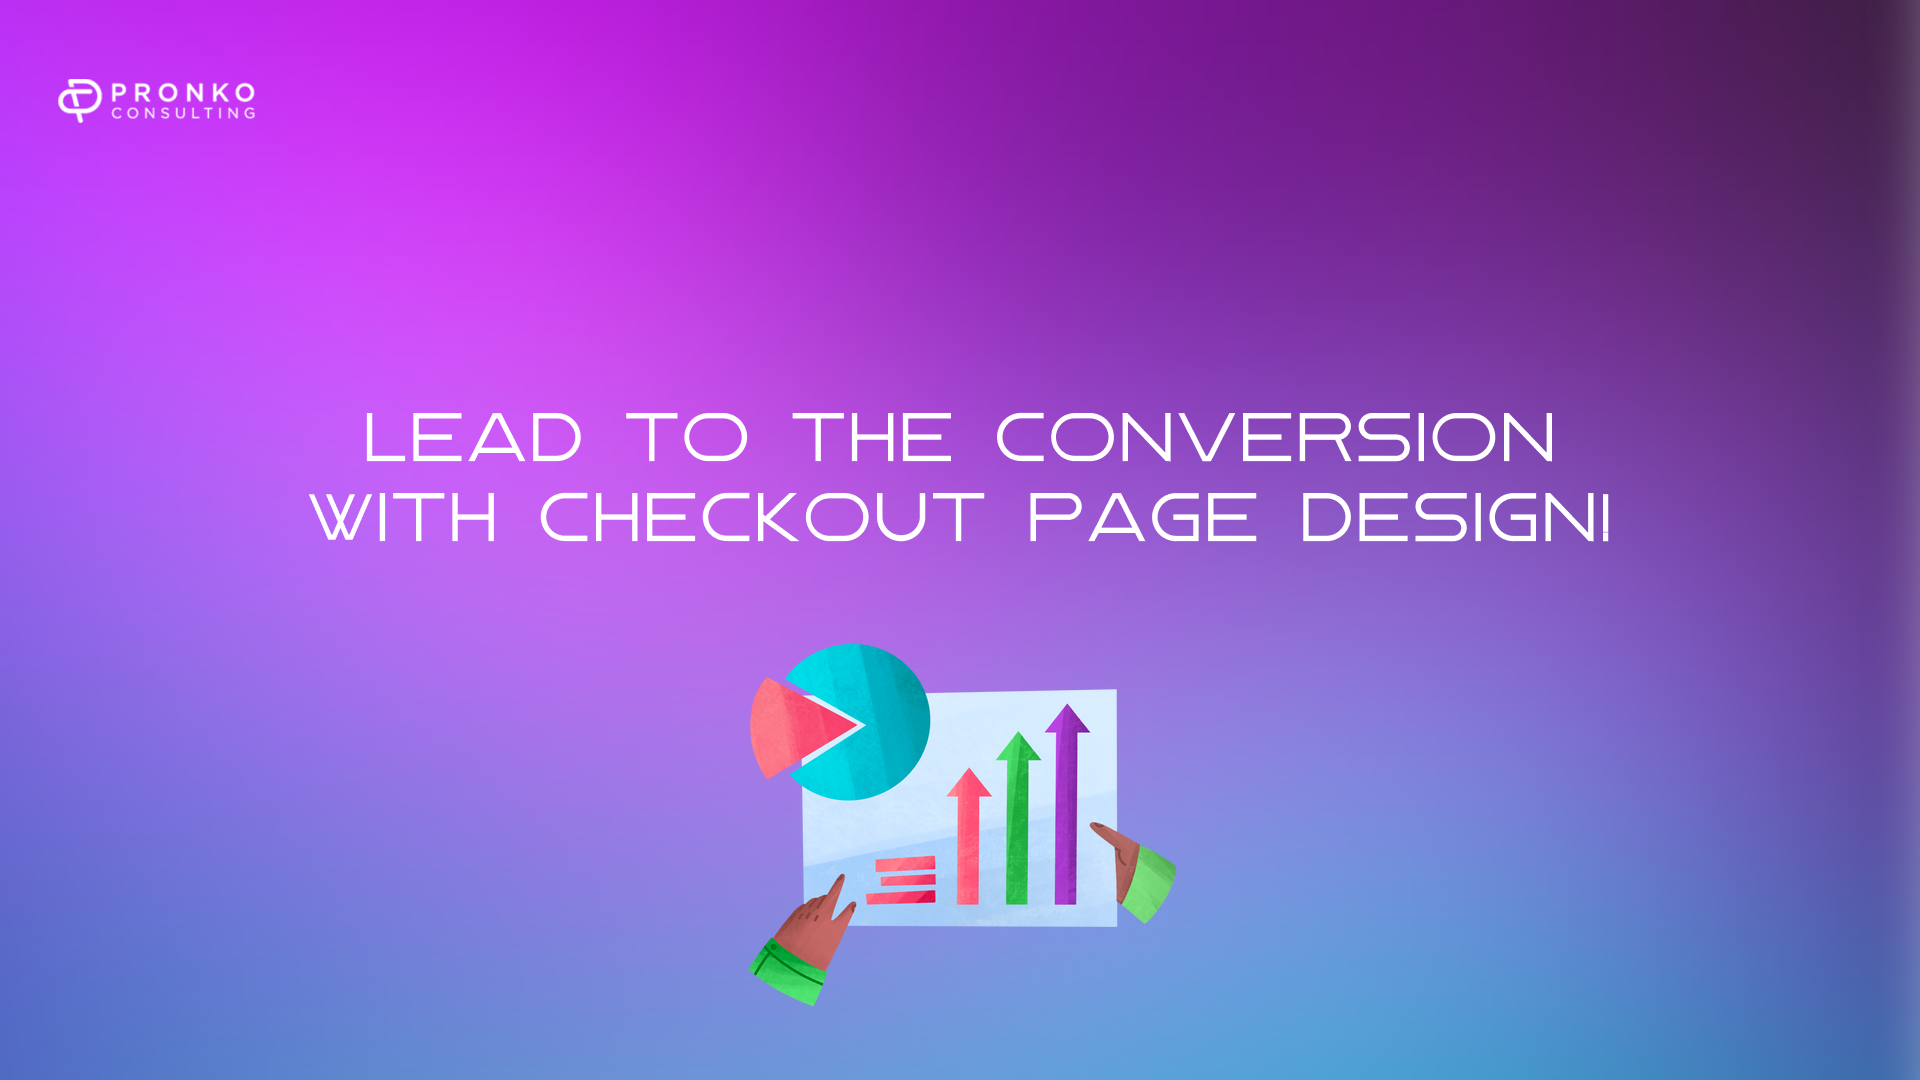 10 Checkout Page Design Tips that Lead to Conversions